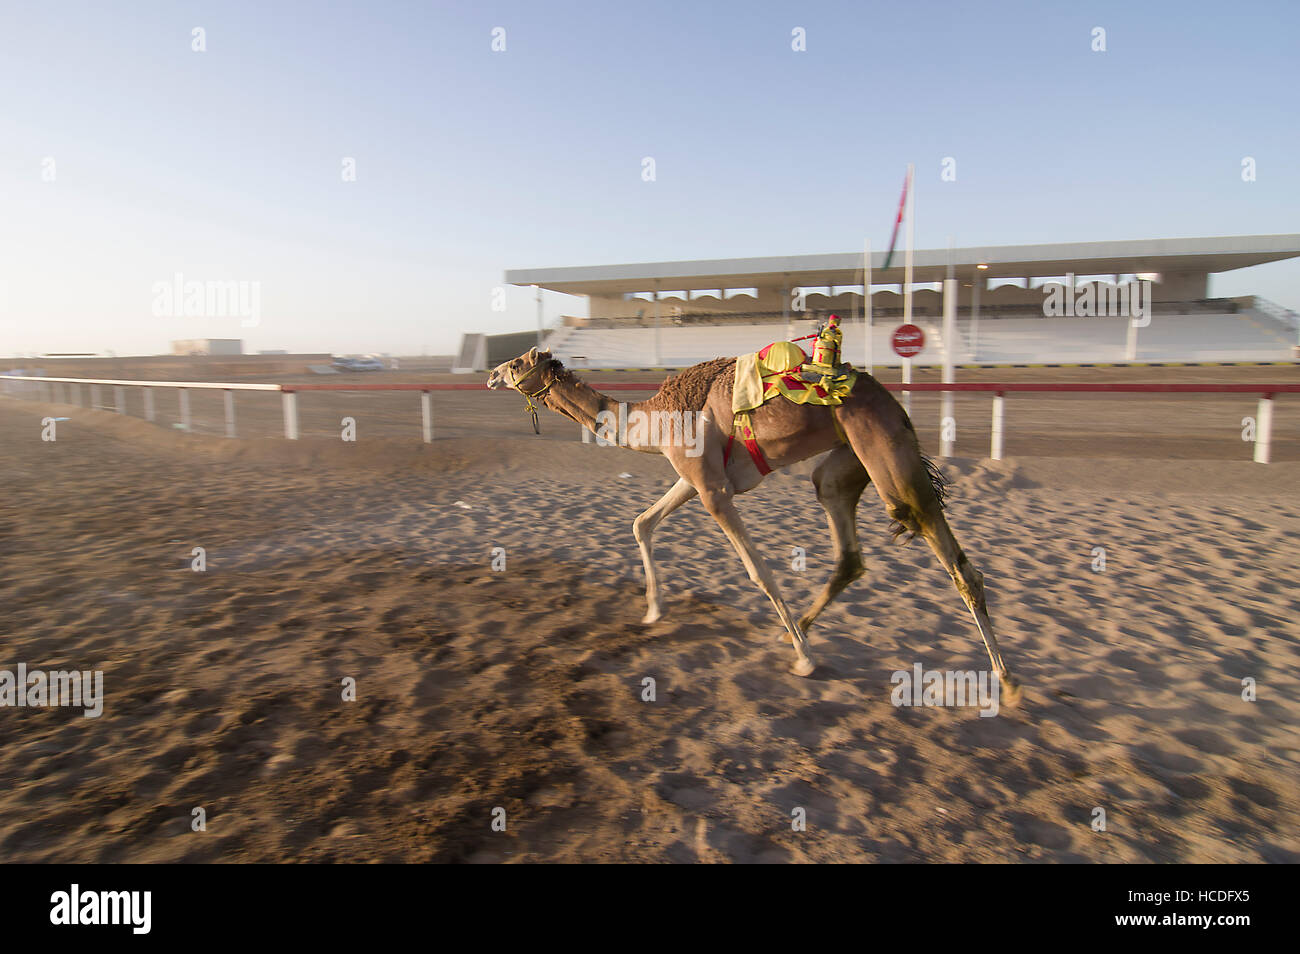 Camel with a robot jockey in the saddle approaching the finish line in a camel race in Oman Stock Photo